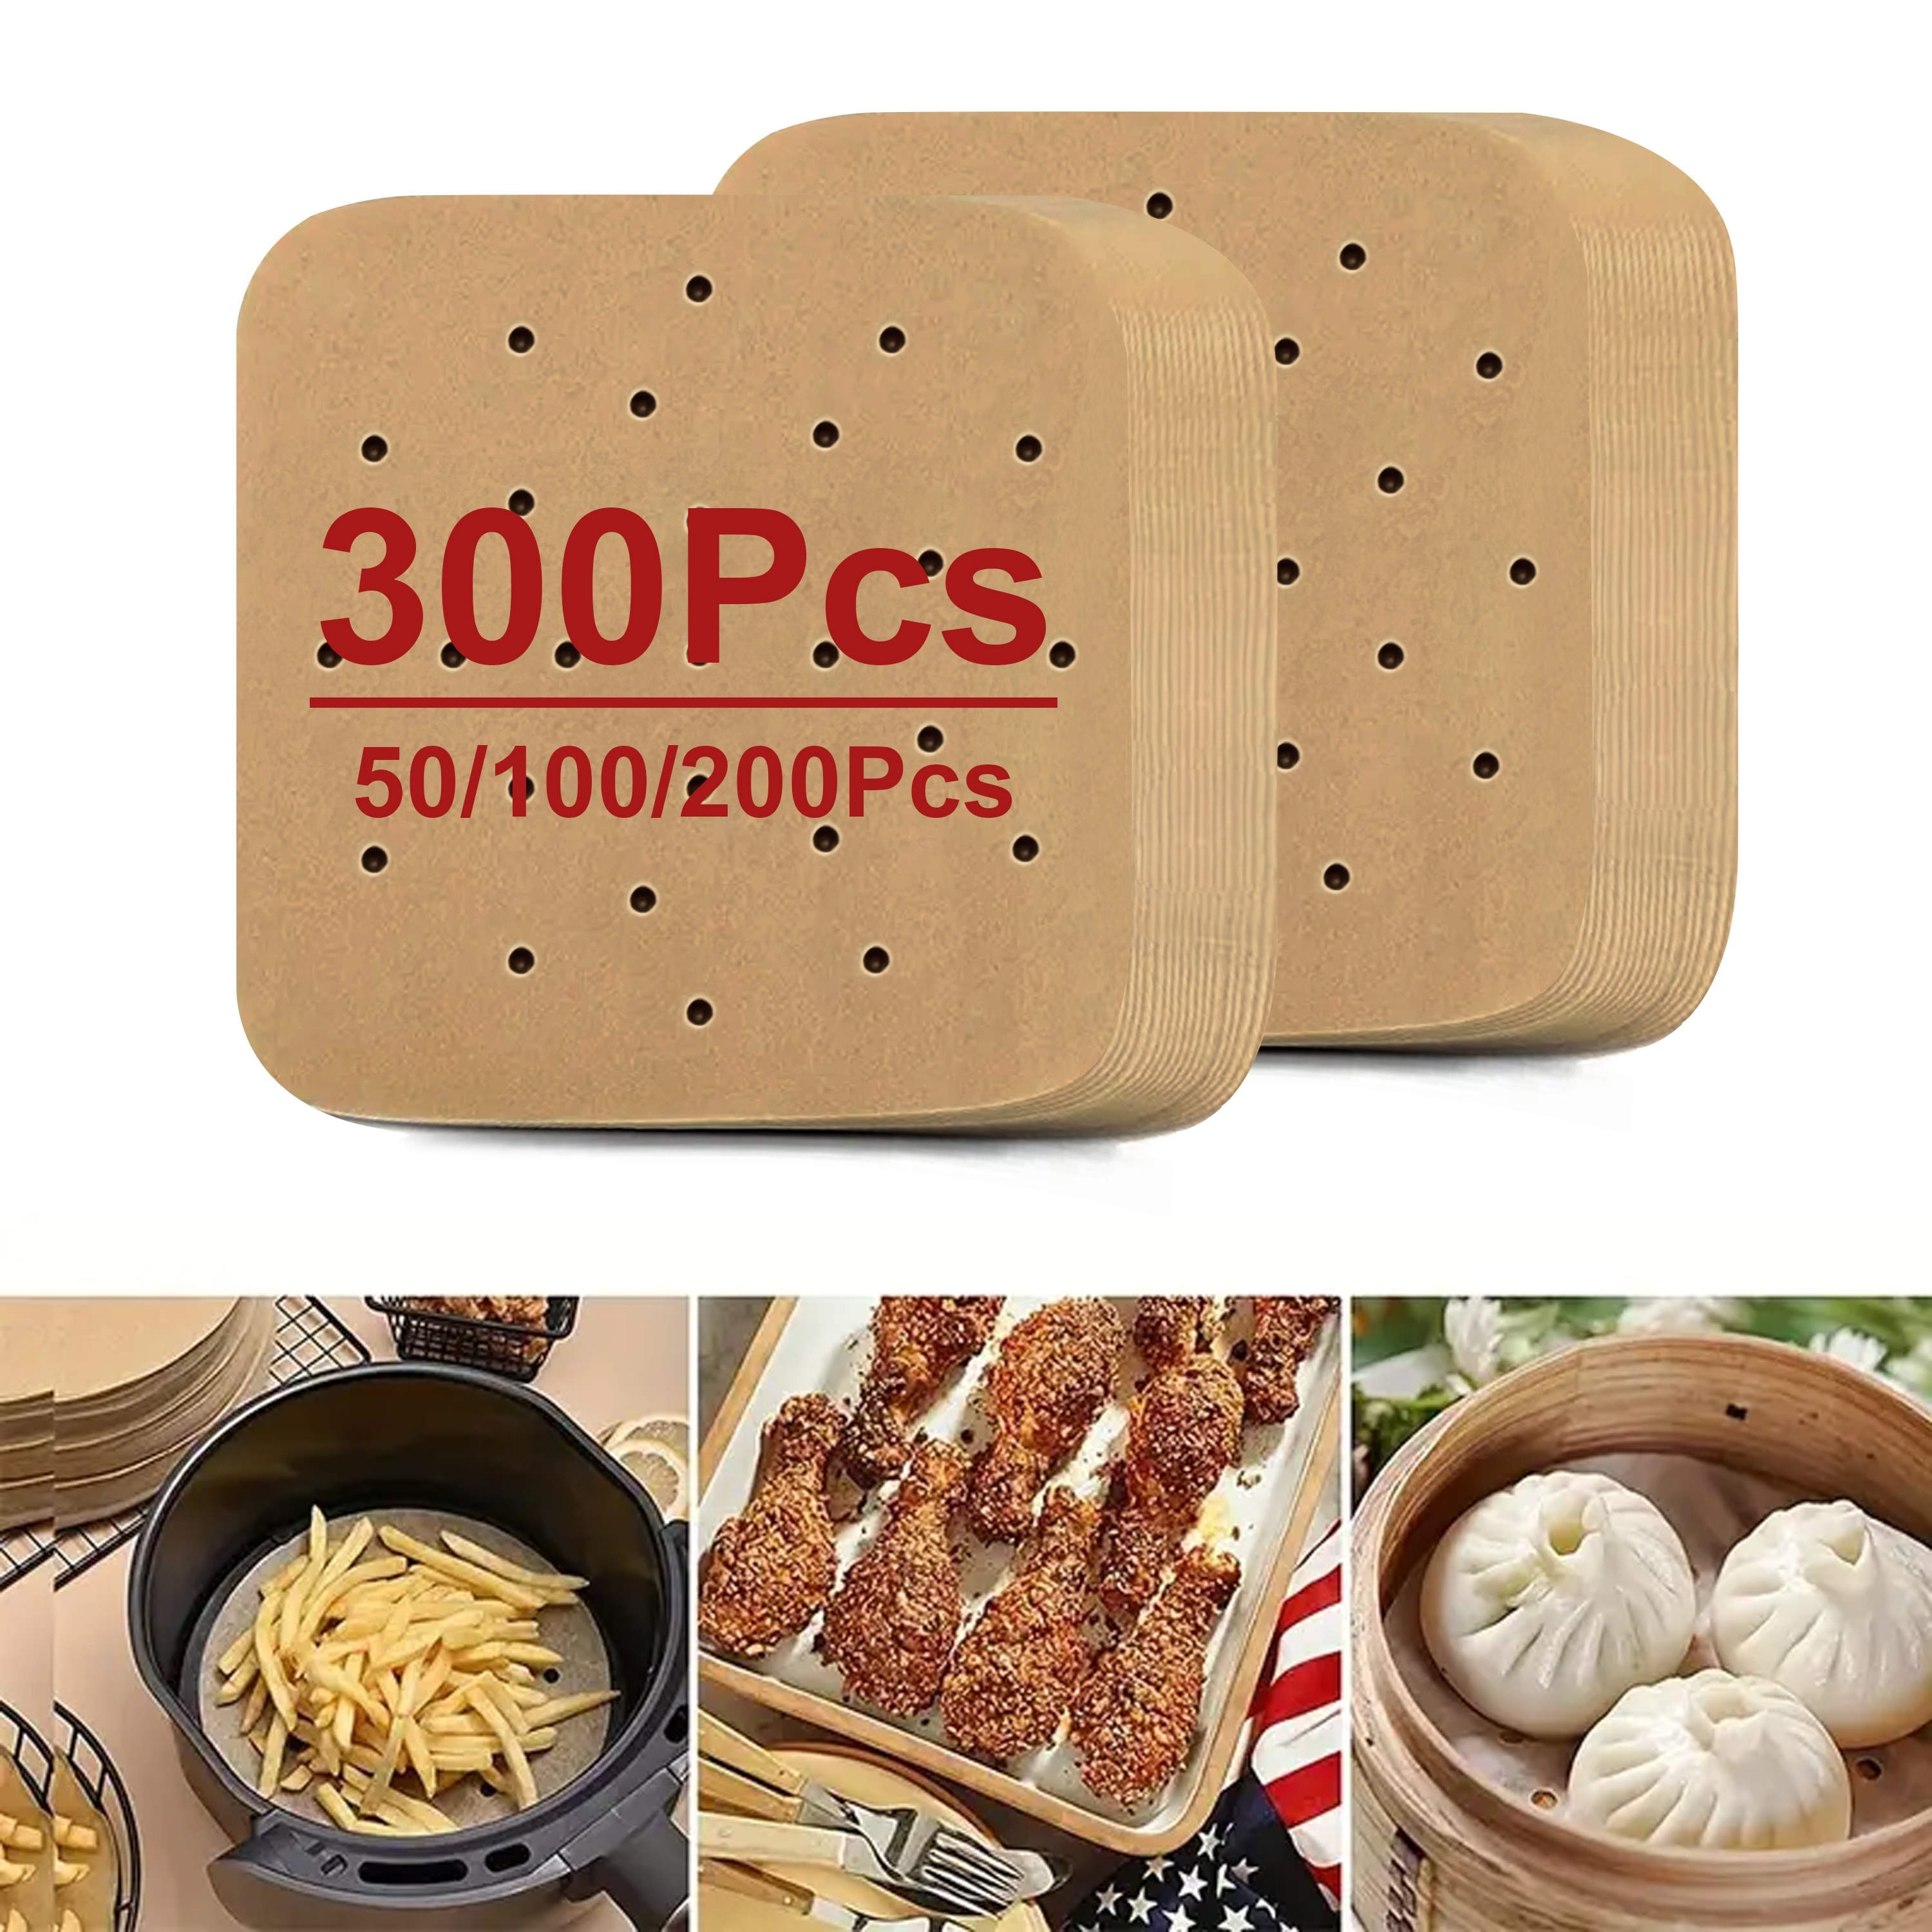 Air Fryer Disposable Paper Liners - 125pcs 8in Square Parchment Paper Non-Stick Airfryer Basket Liners for Steamer Microwave Oven